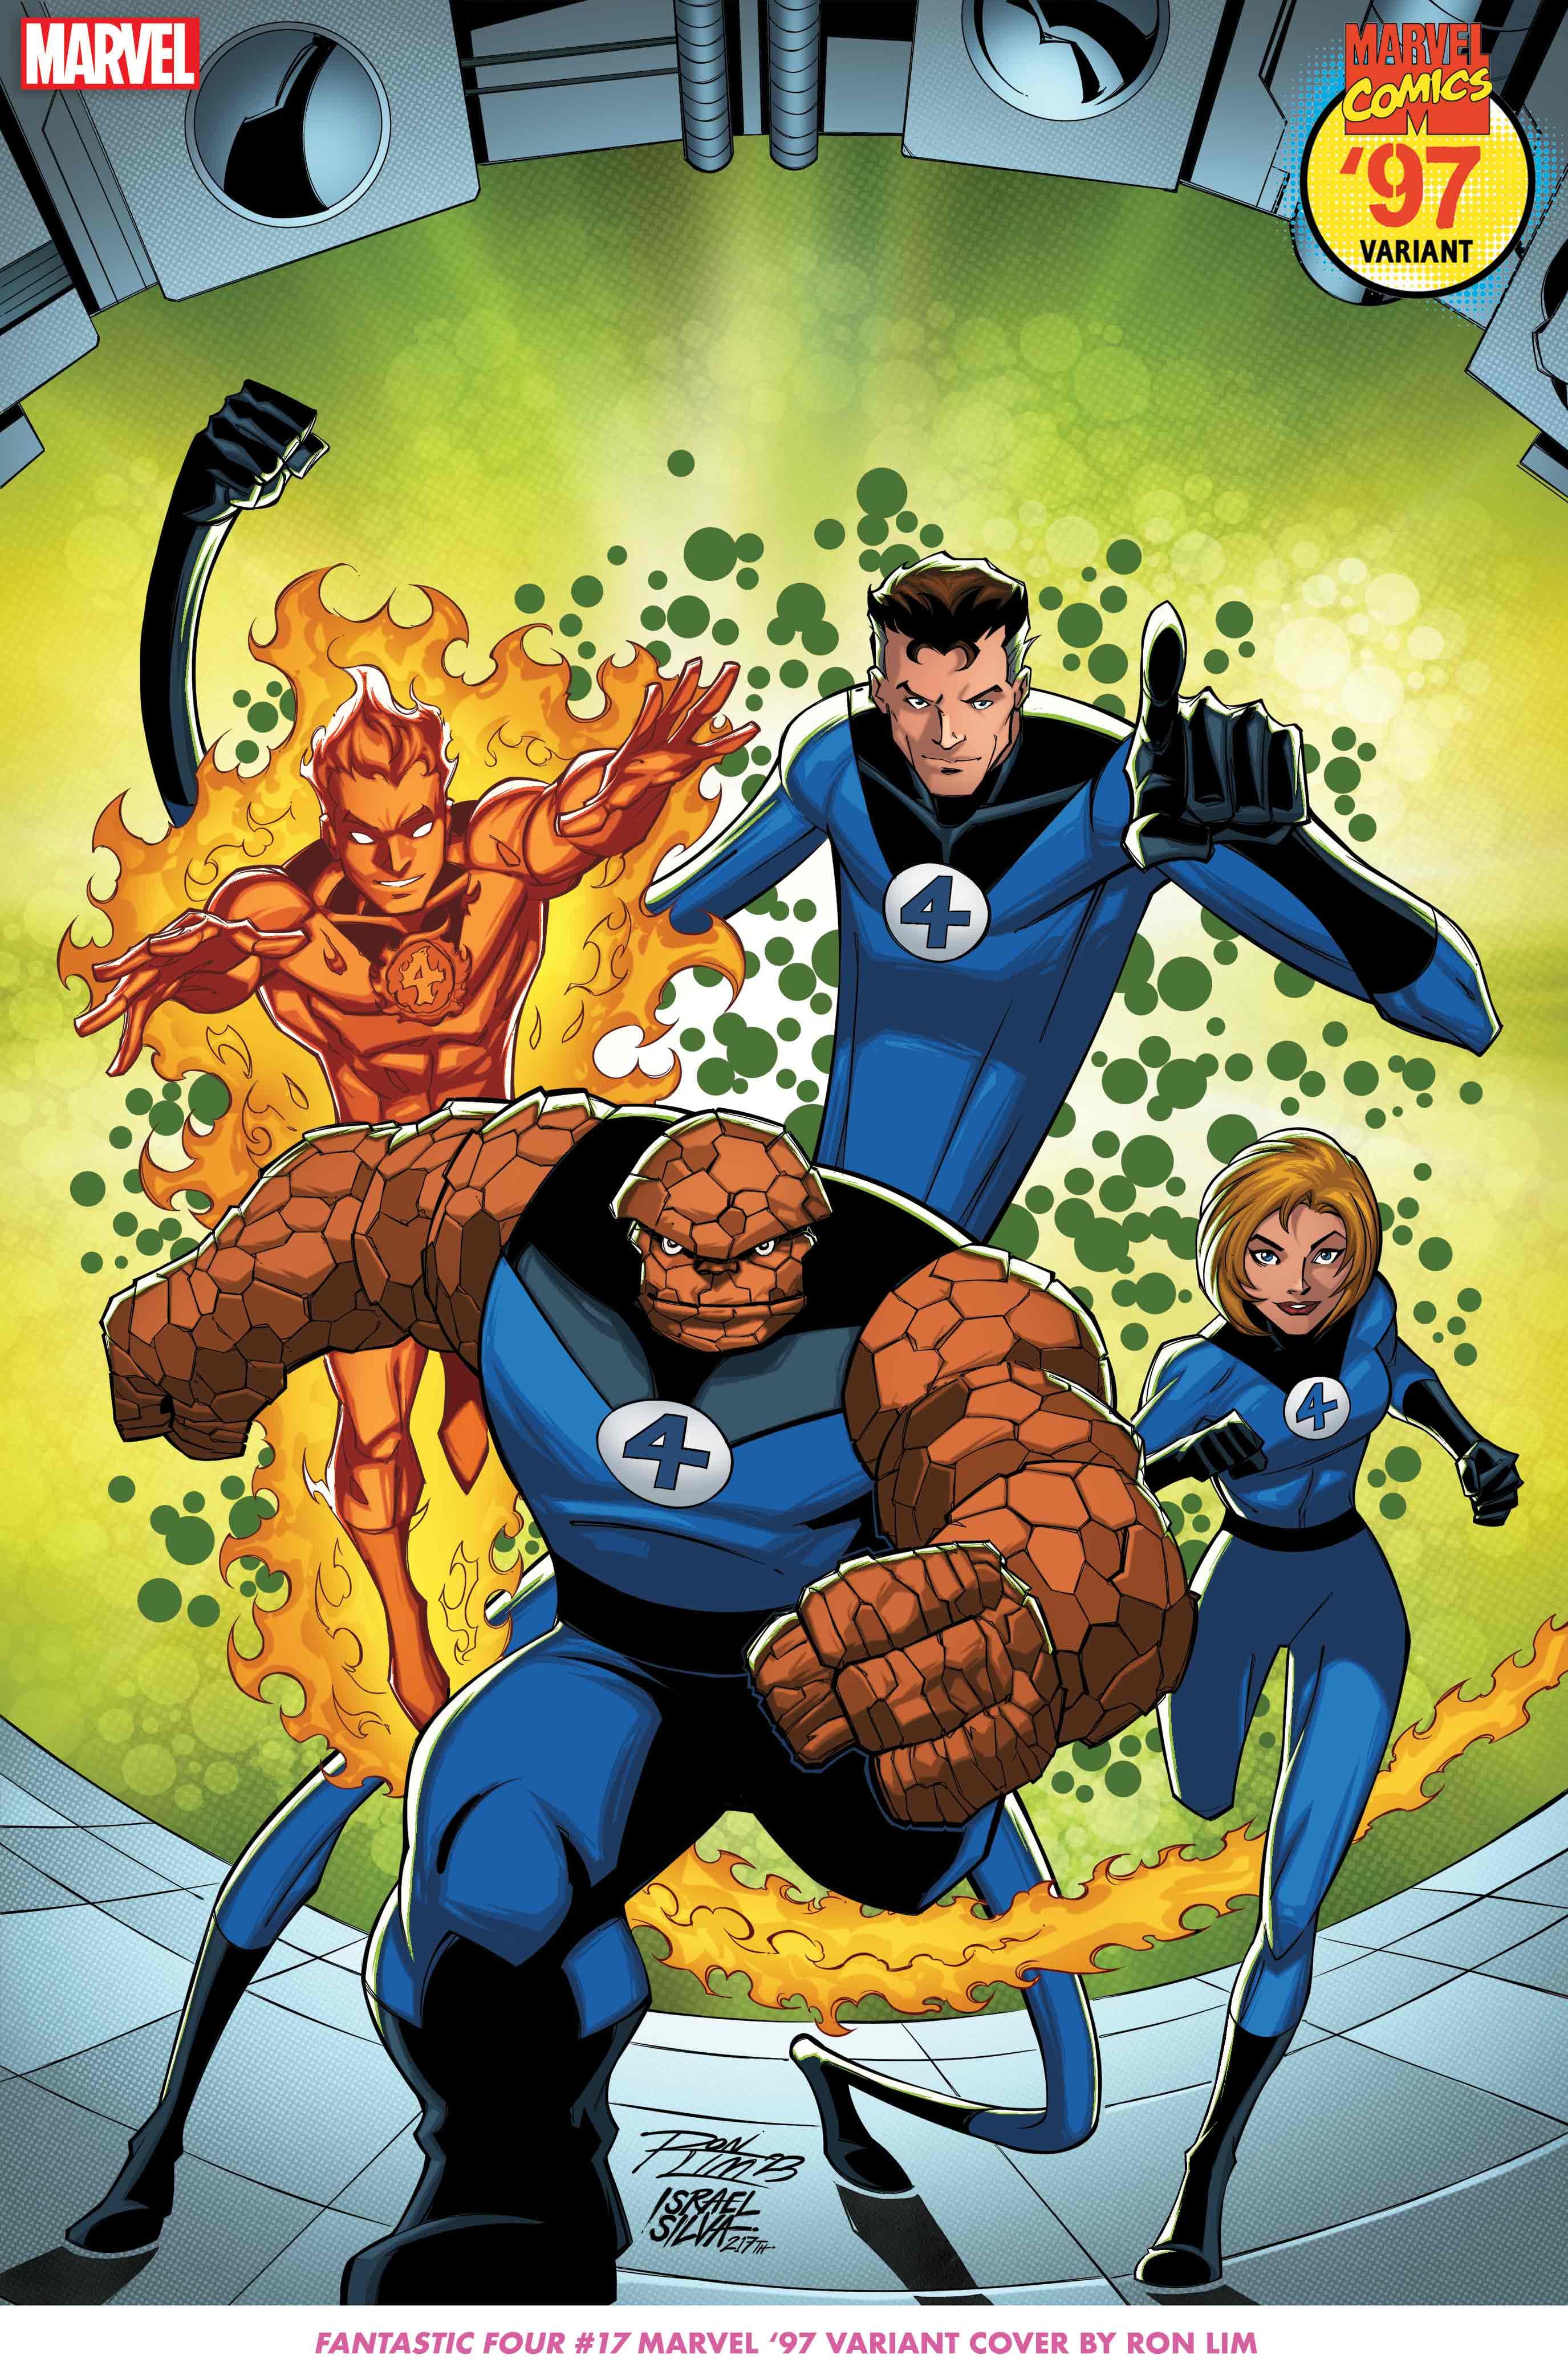 FANTASTIC FOUR #17 Marvel ‘97 Variant Cover by Ron Lim​​​​​​​